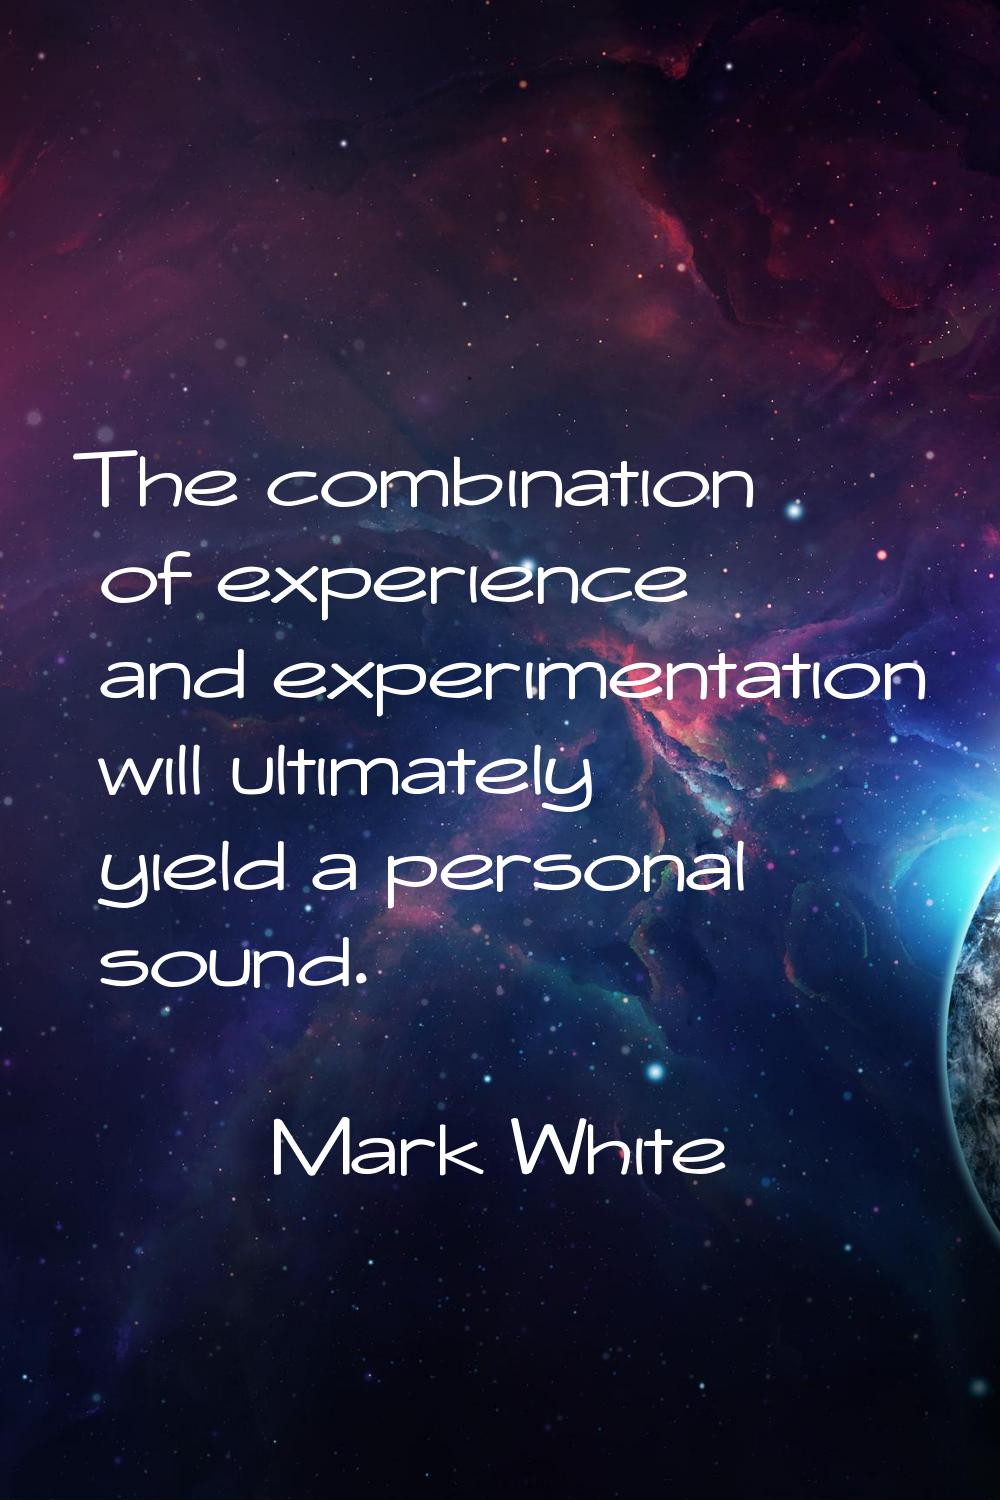 The combination of experience and experimentation will ultimately yield a personal sound.